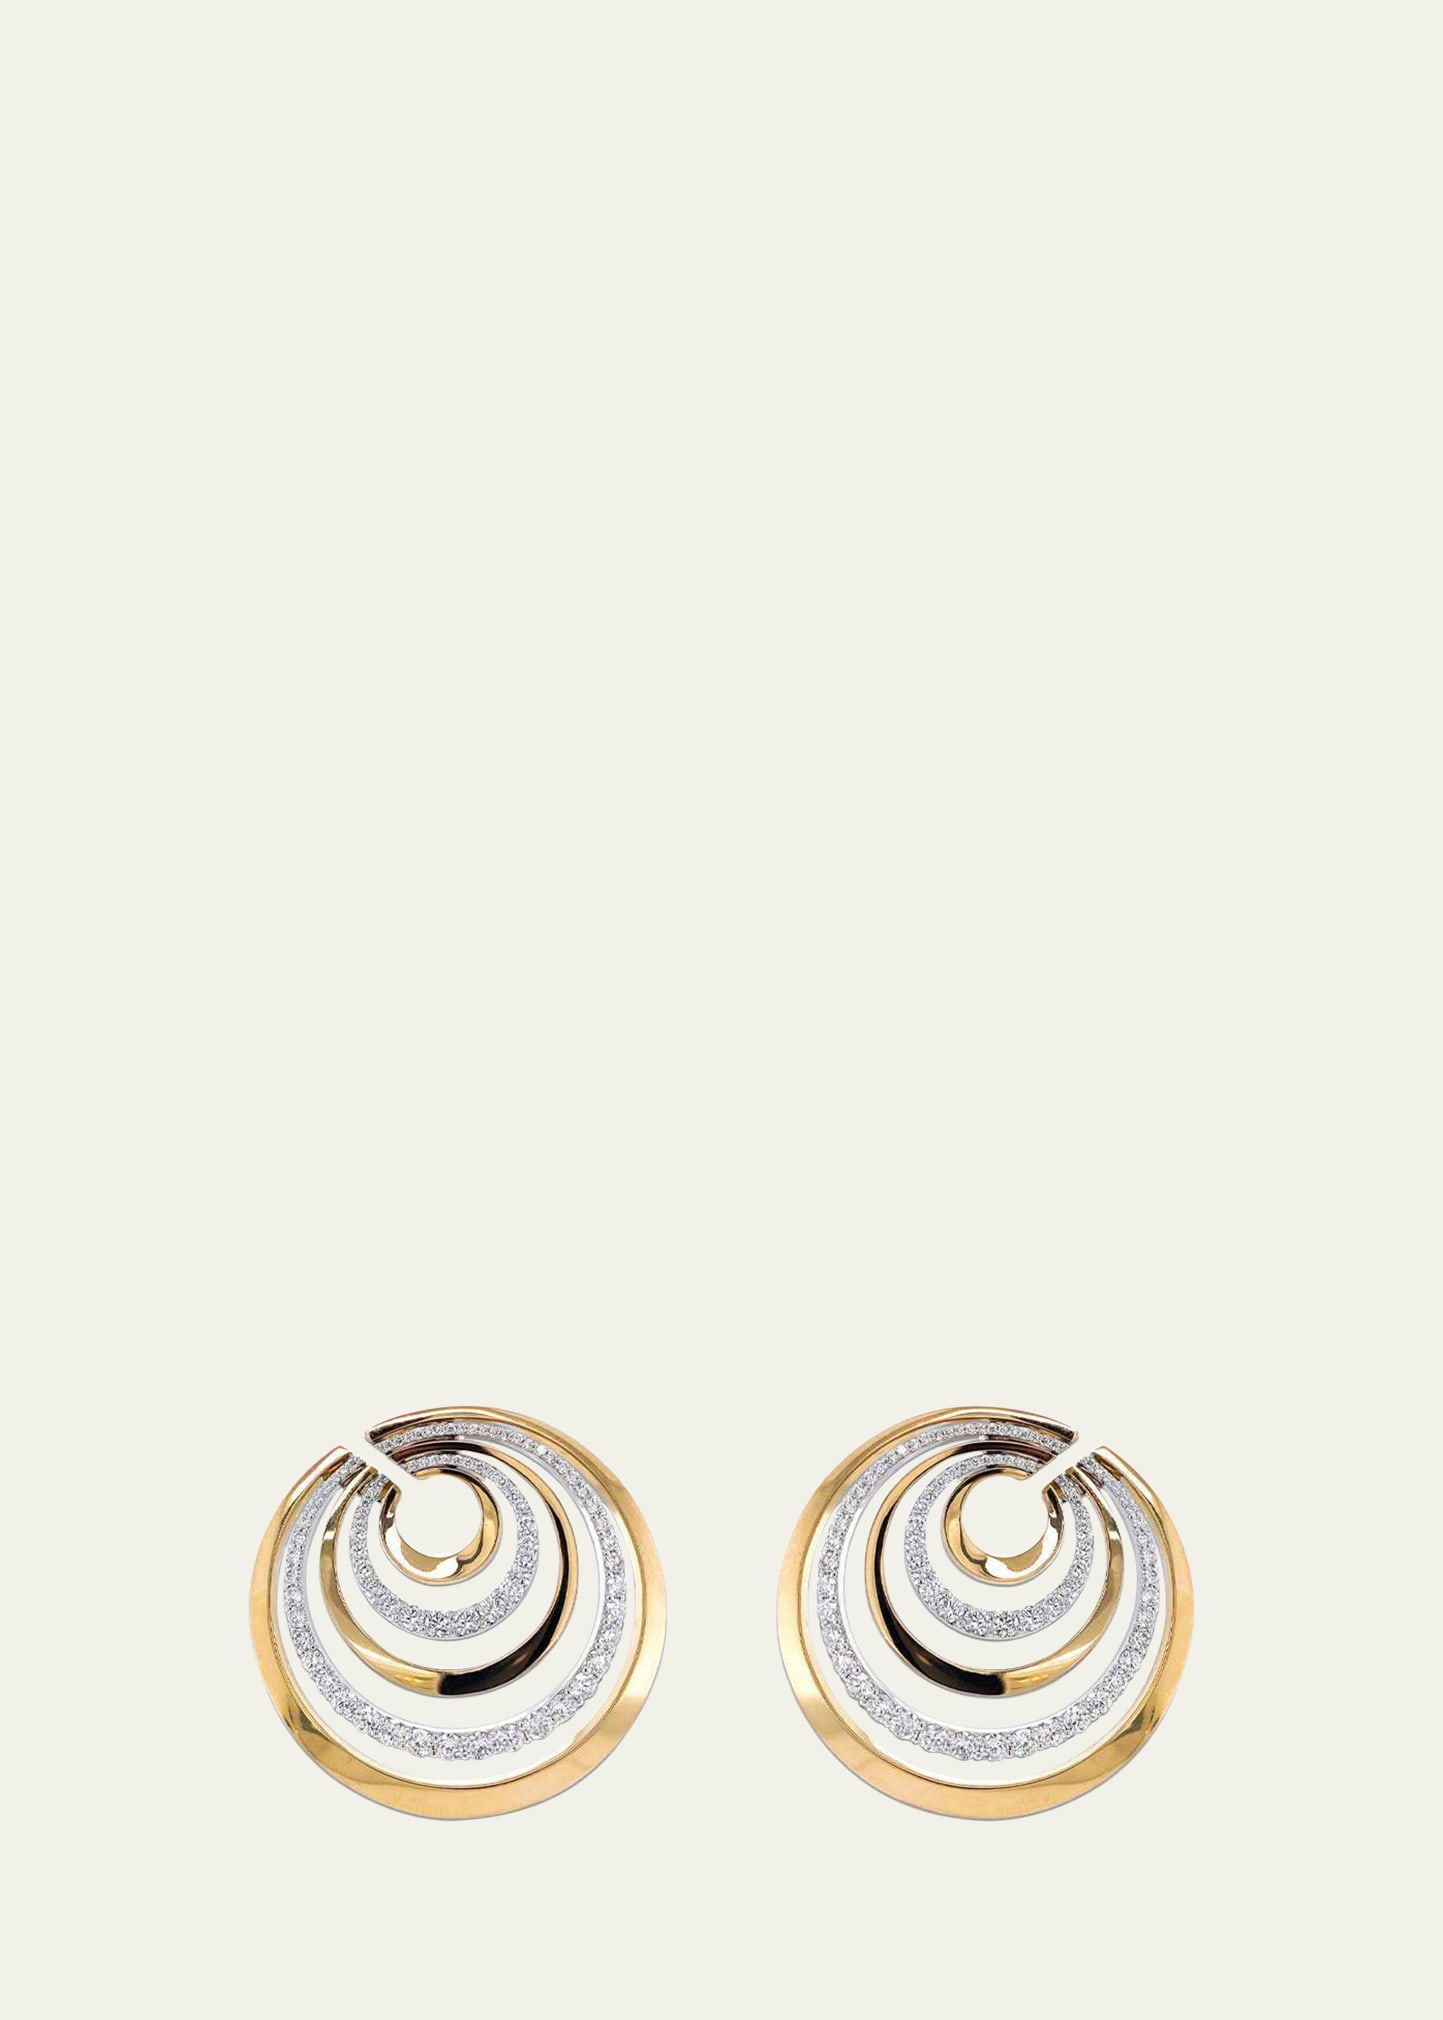 18K Rose Gold Spiral Earrings with Diamonds